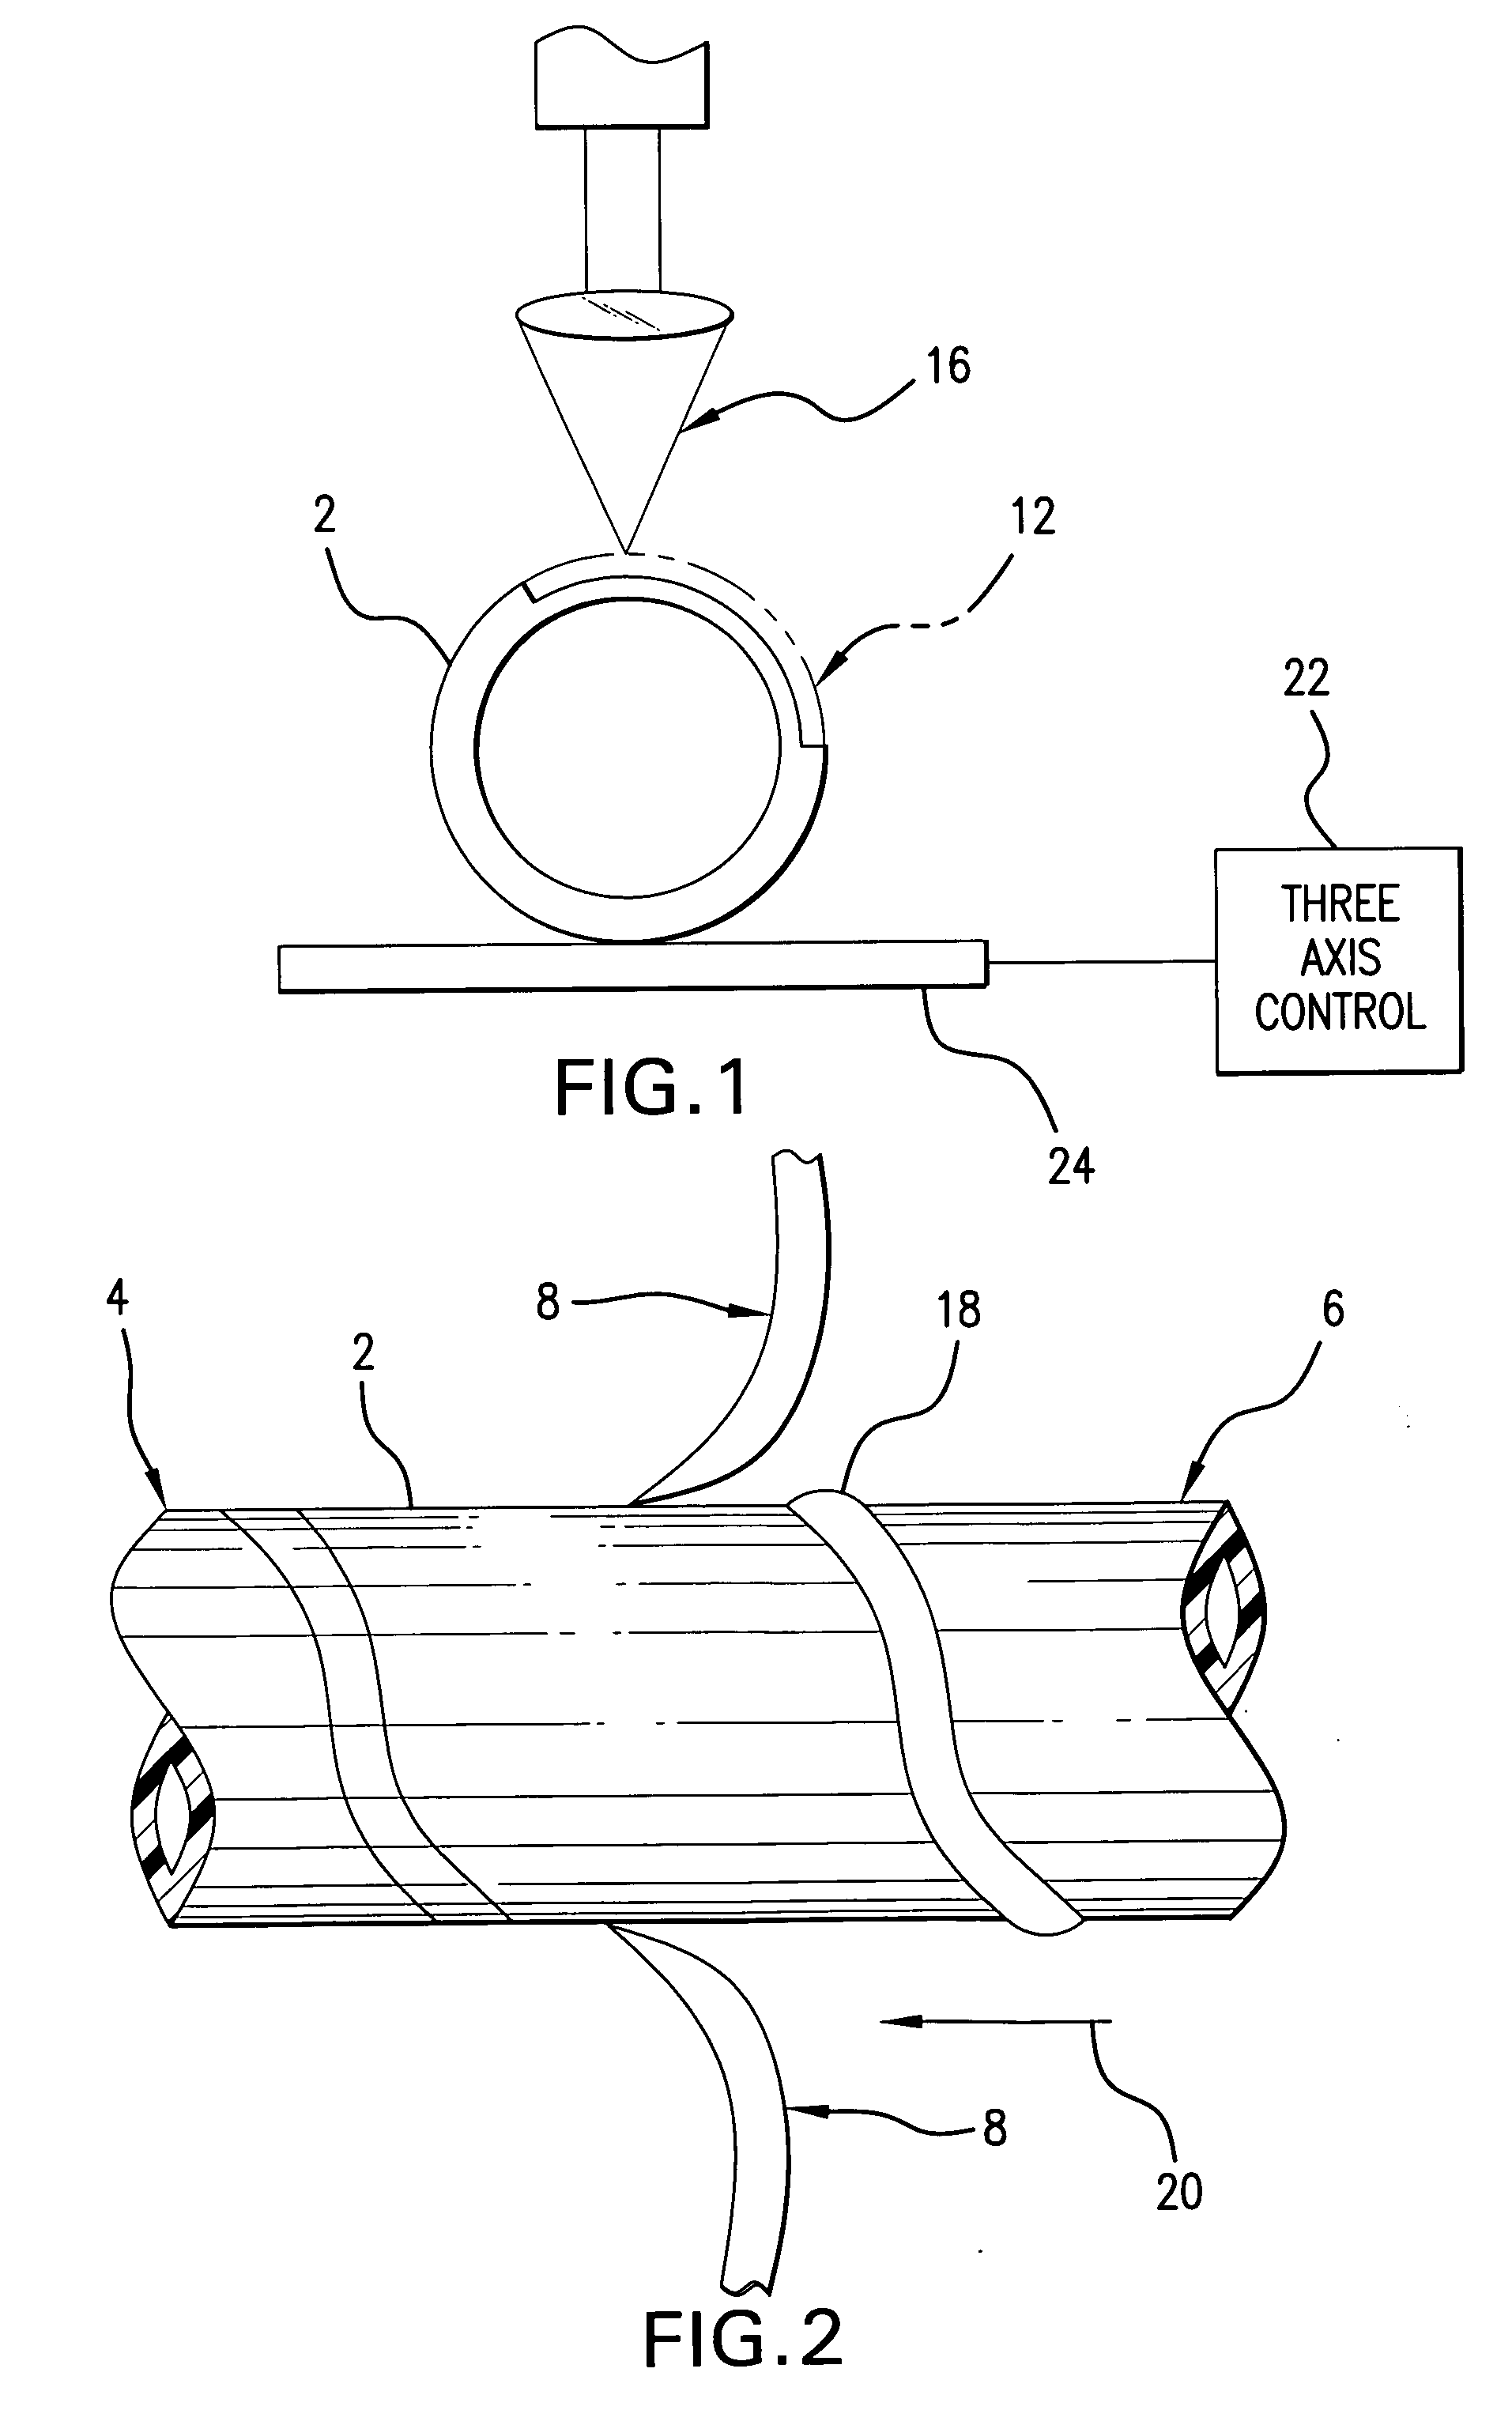 Polymer tube with embedded electrically conductive patterns and method for providing electrically conductive paths in polymer tubing